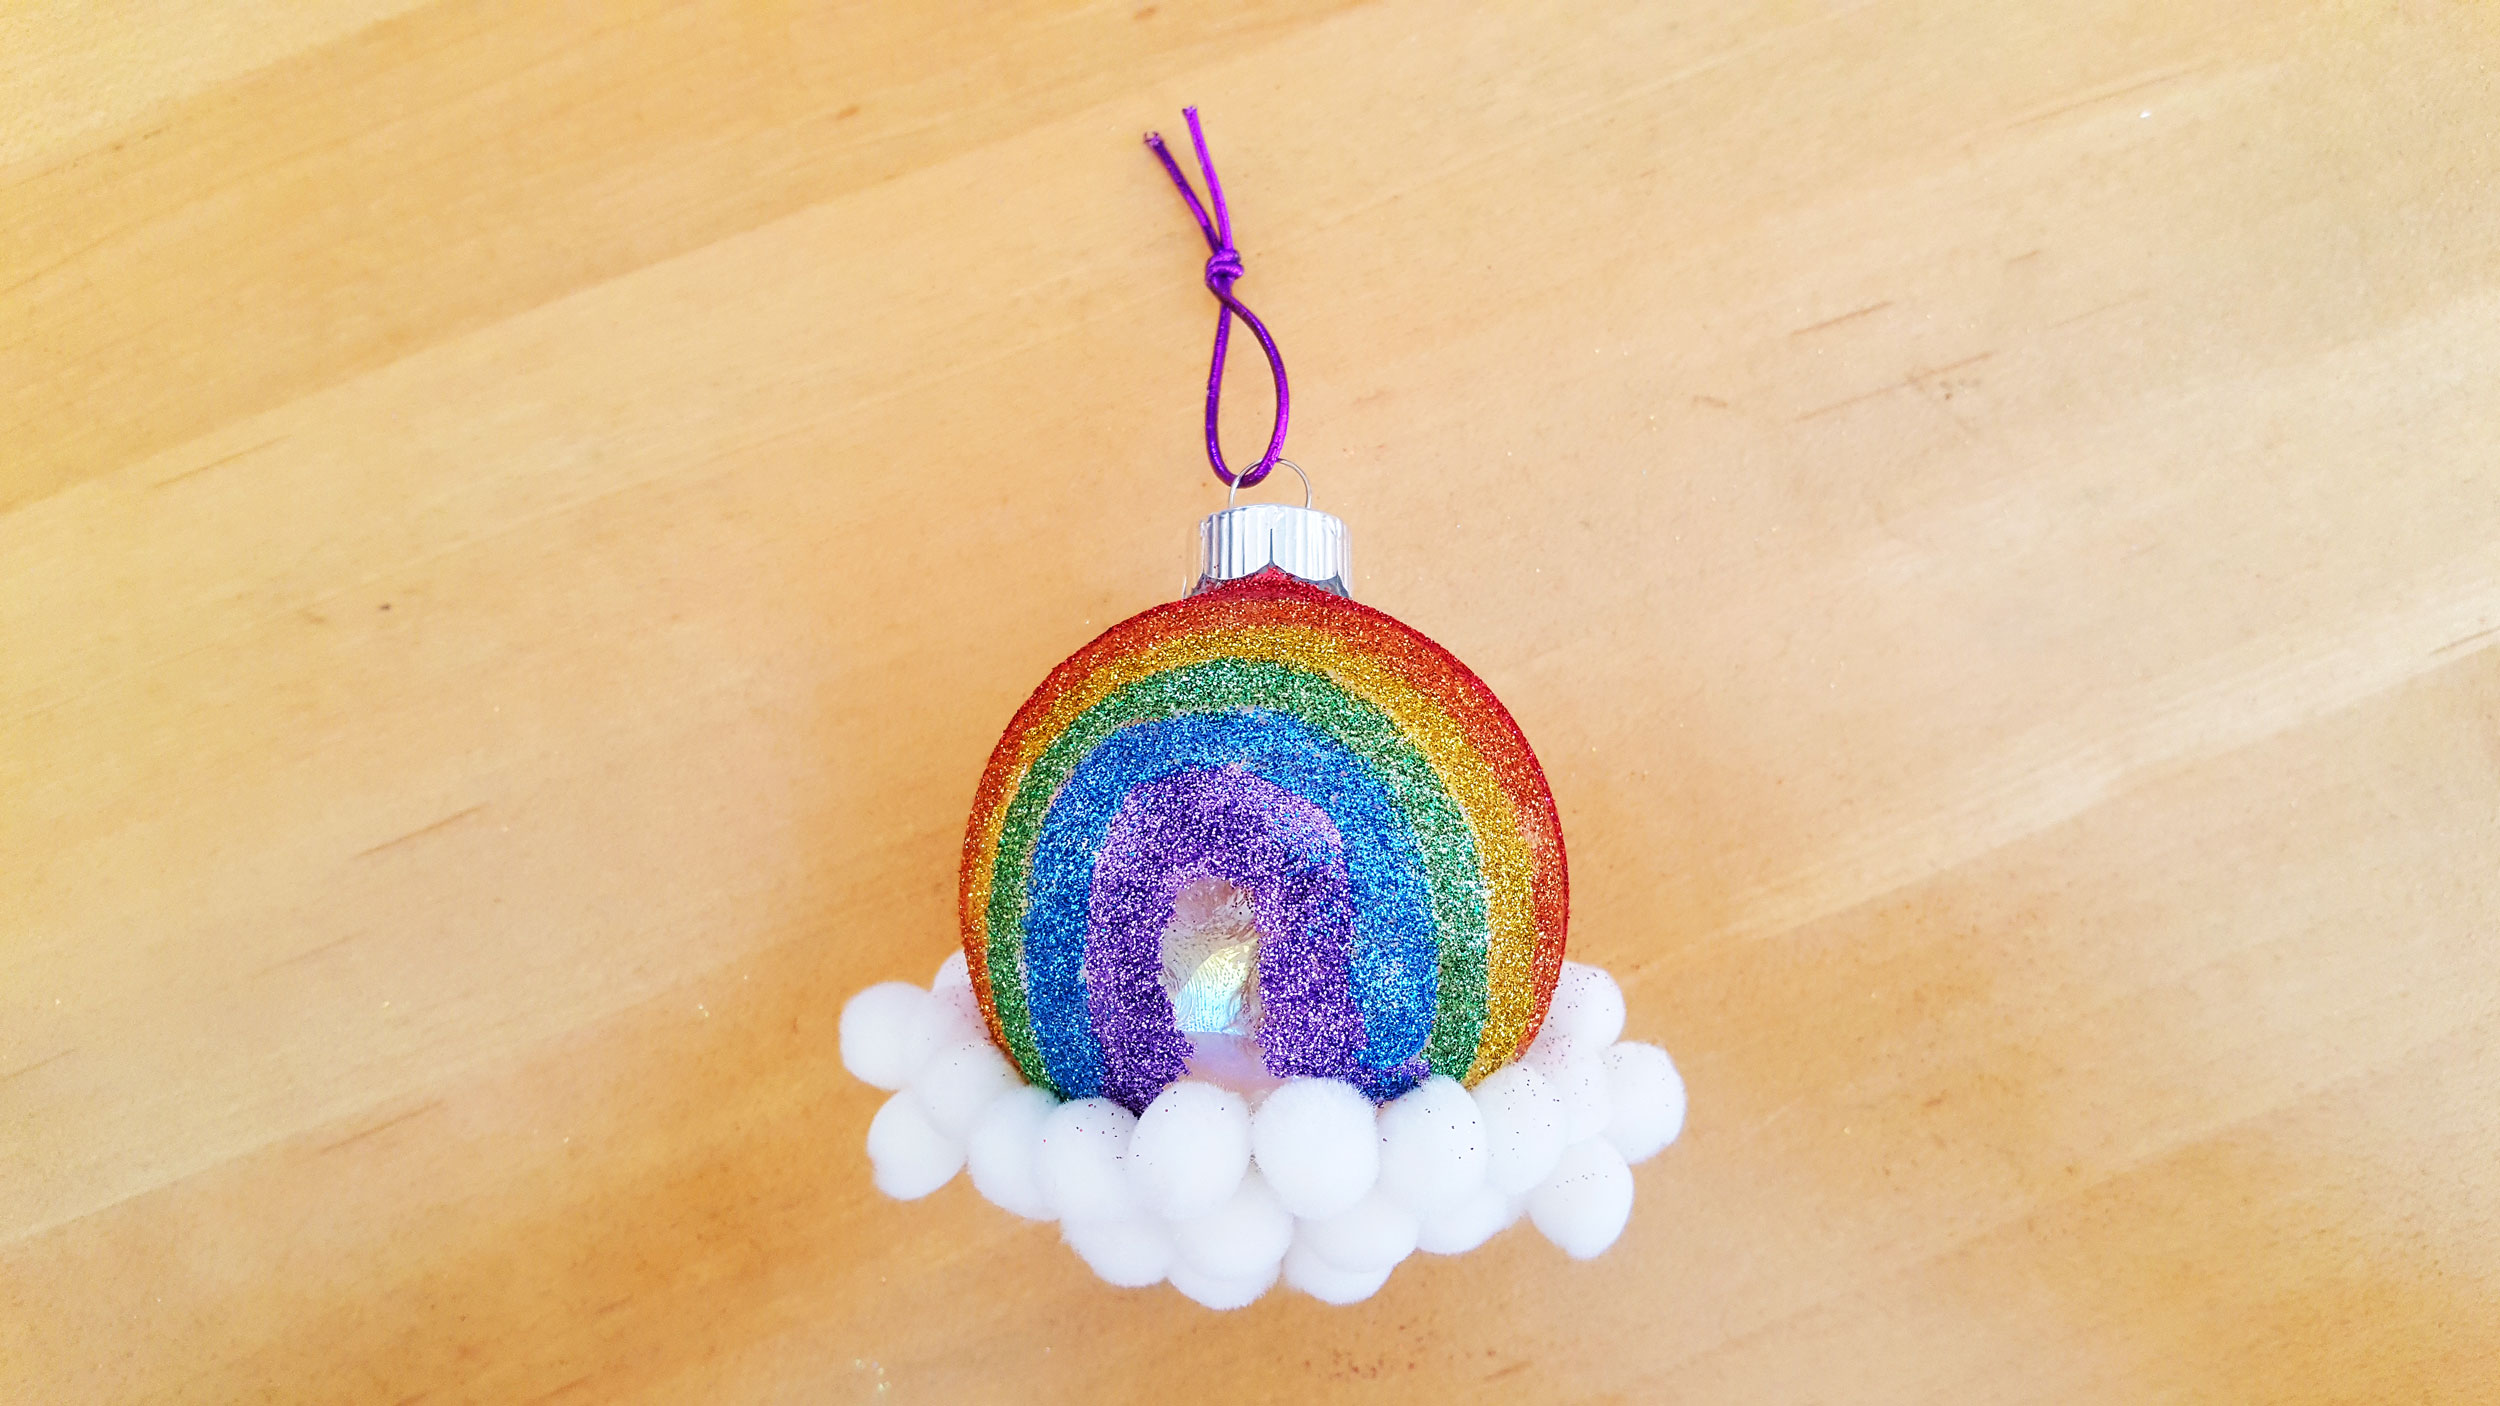 &nbsp;That’s it!&nbsp; Now your have a colorful rainbow craft that you can hang in your home from a window or ornament stand.&nbsp;| OrnamentShop.com